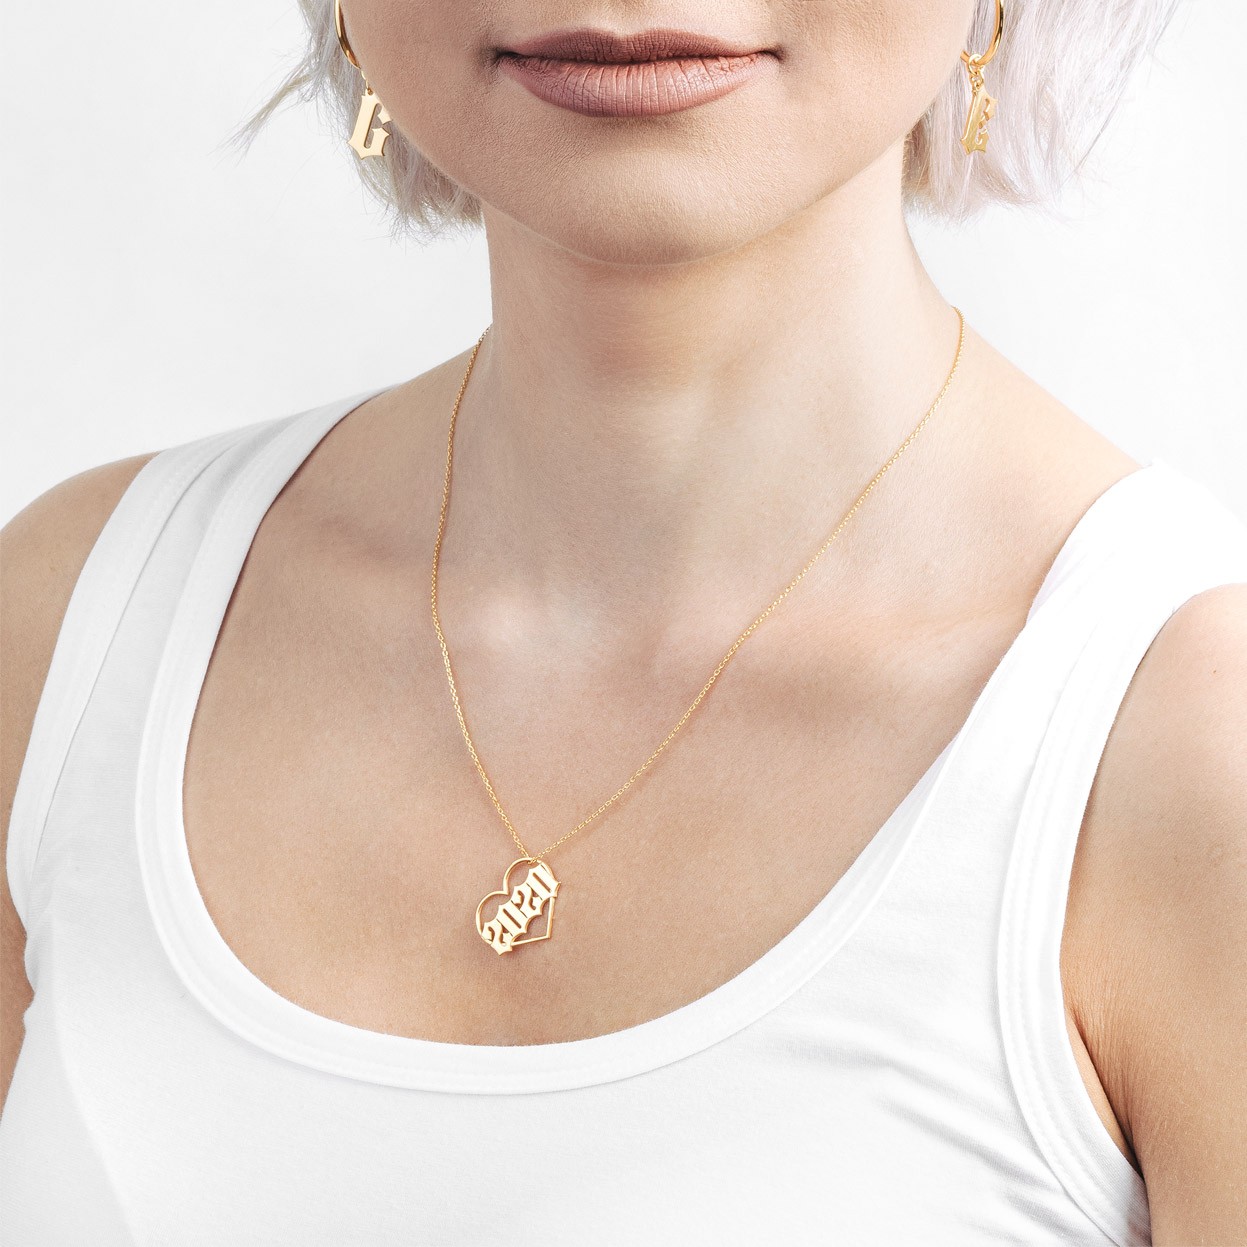 T°ra'vel'' Necklace - your date, silver 925